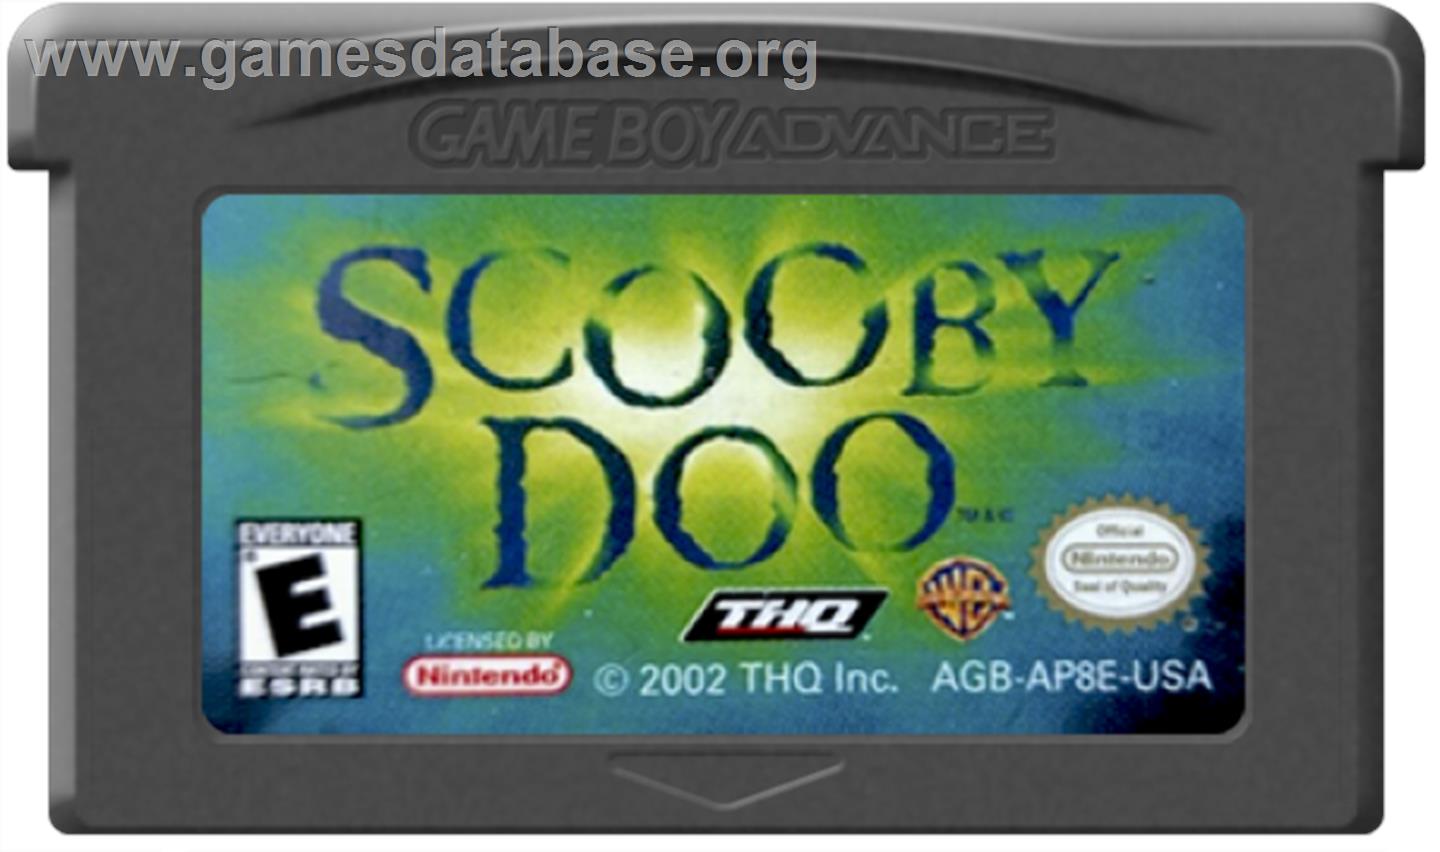 Scooby Doo: The Motion Picture - Nintendo Game Boy Advance - Artwork - Cartridge